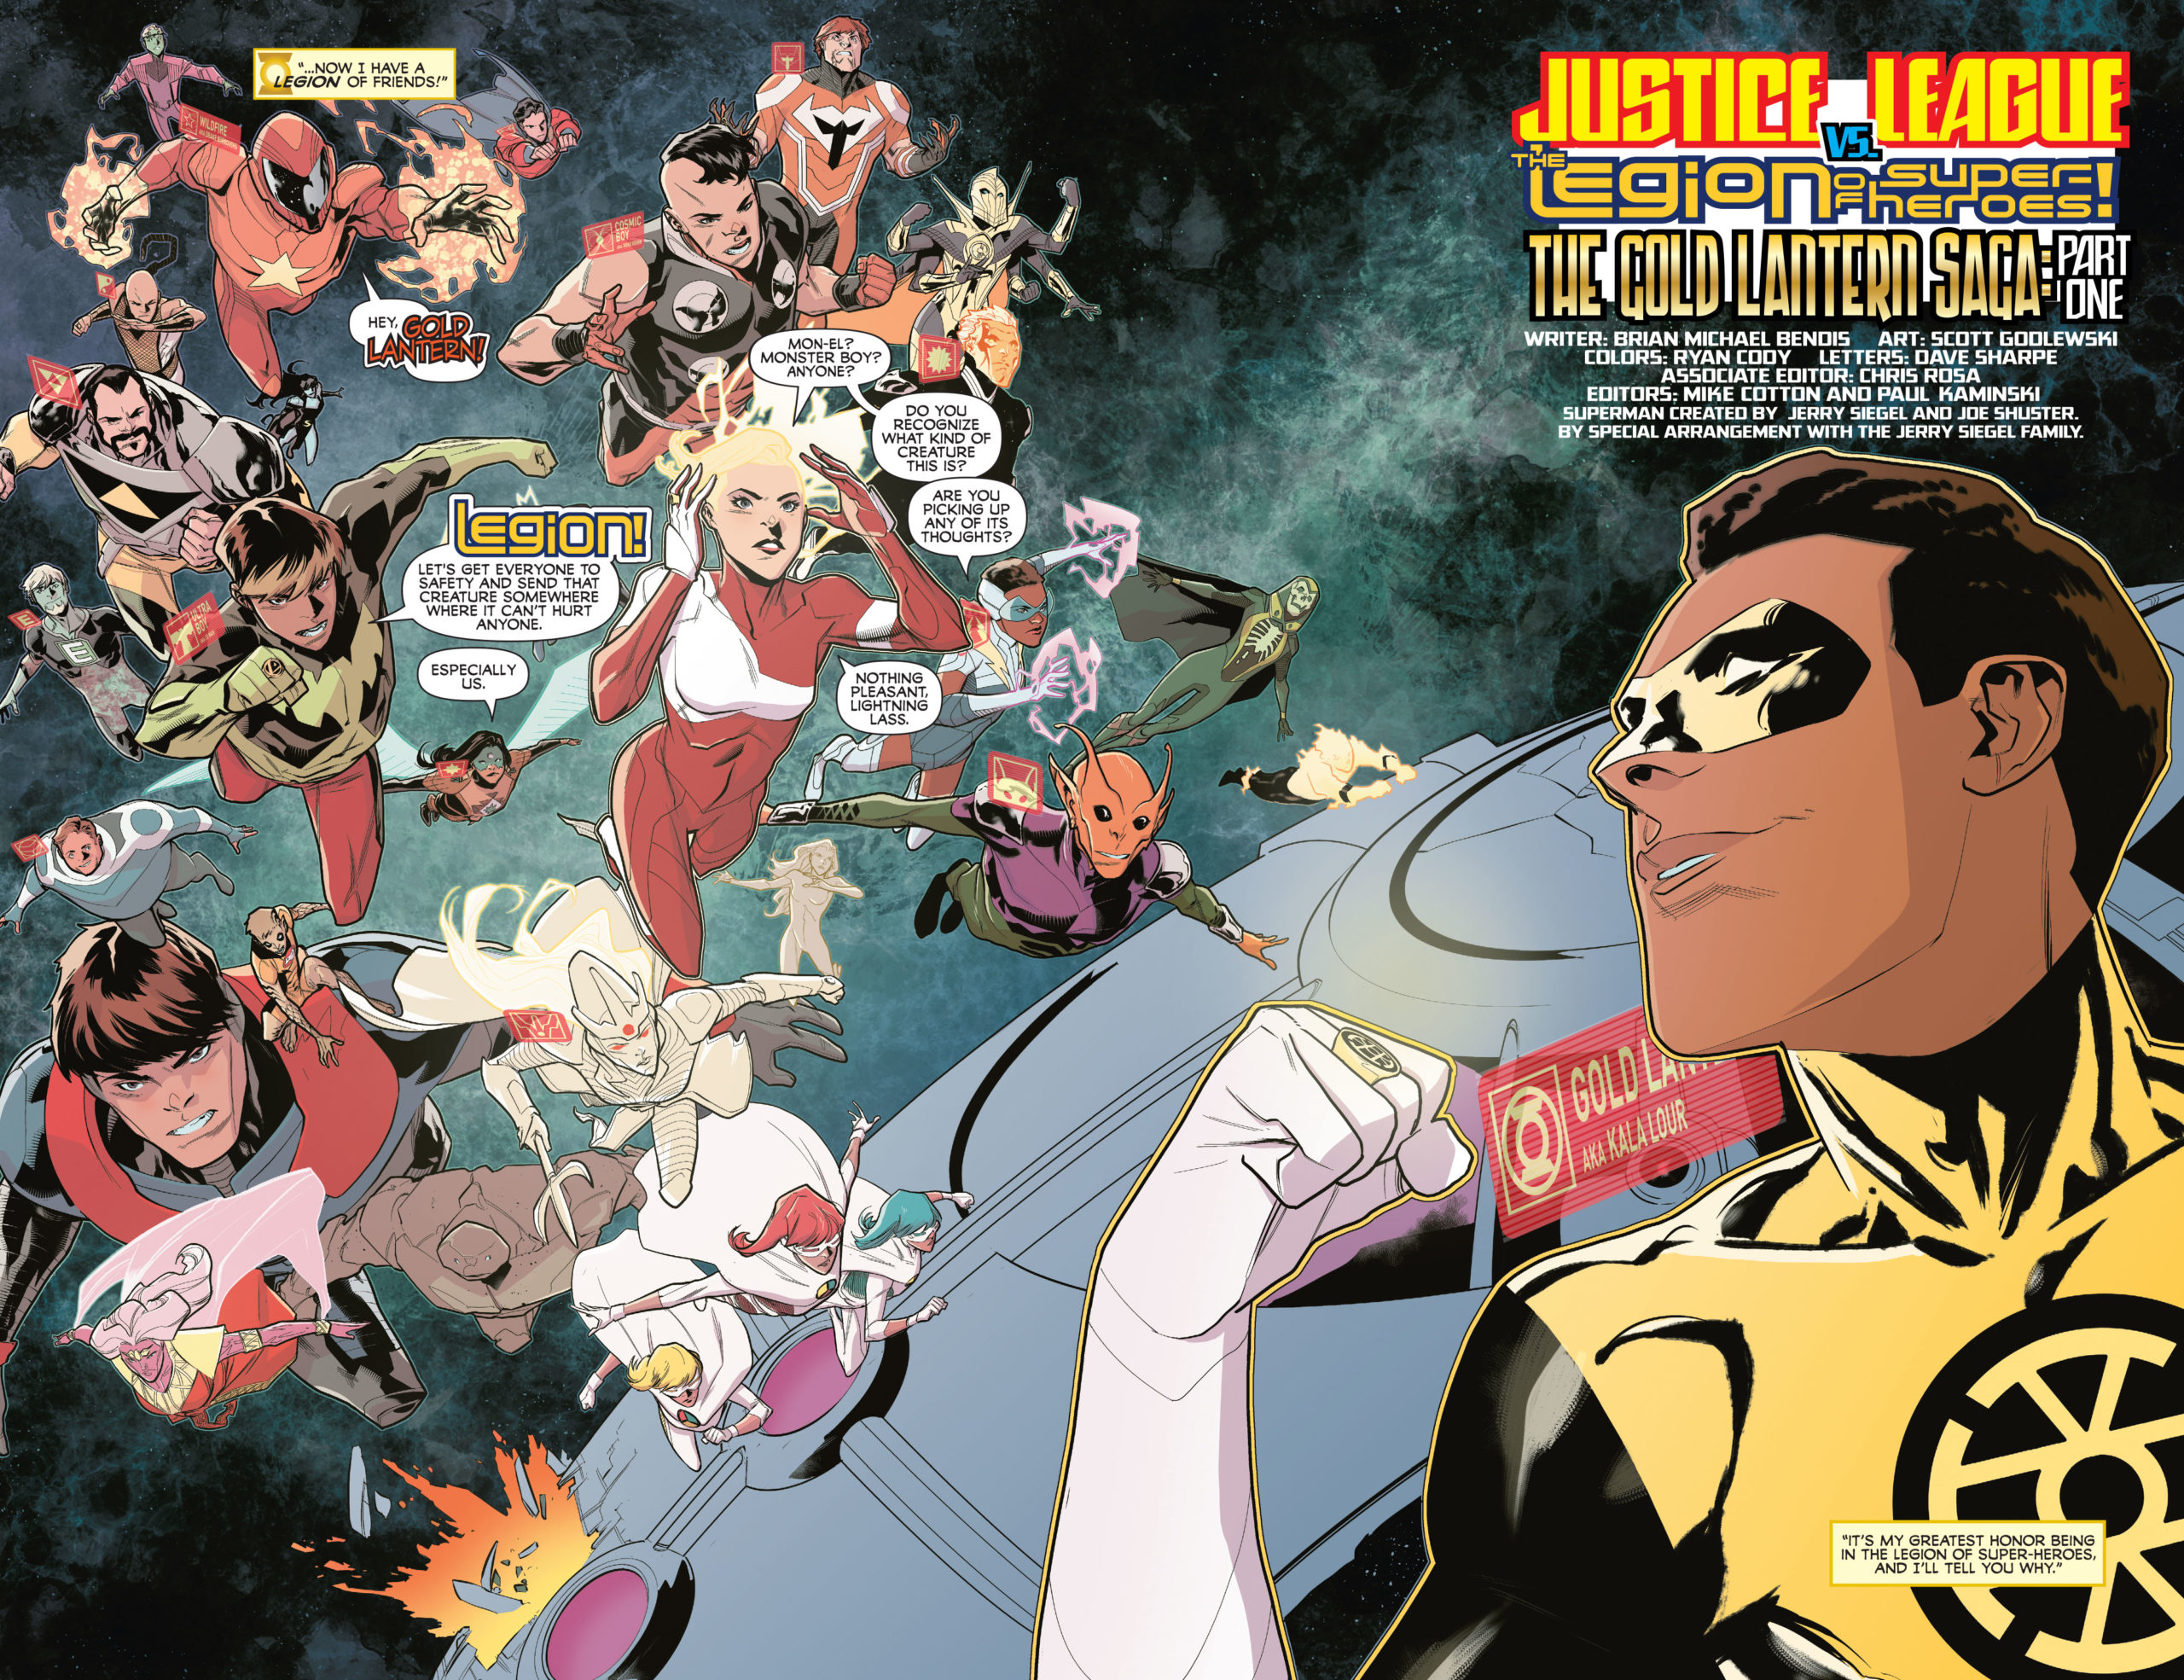 Justice League Vs. The Legion of Super-Heroes #1 Double Page Spread